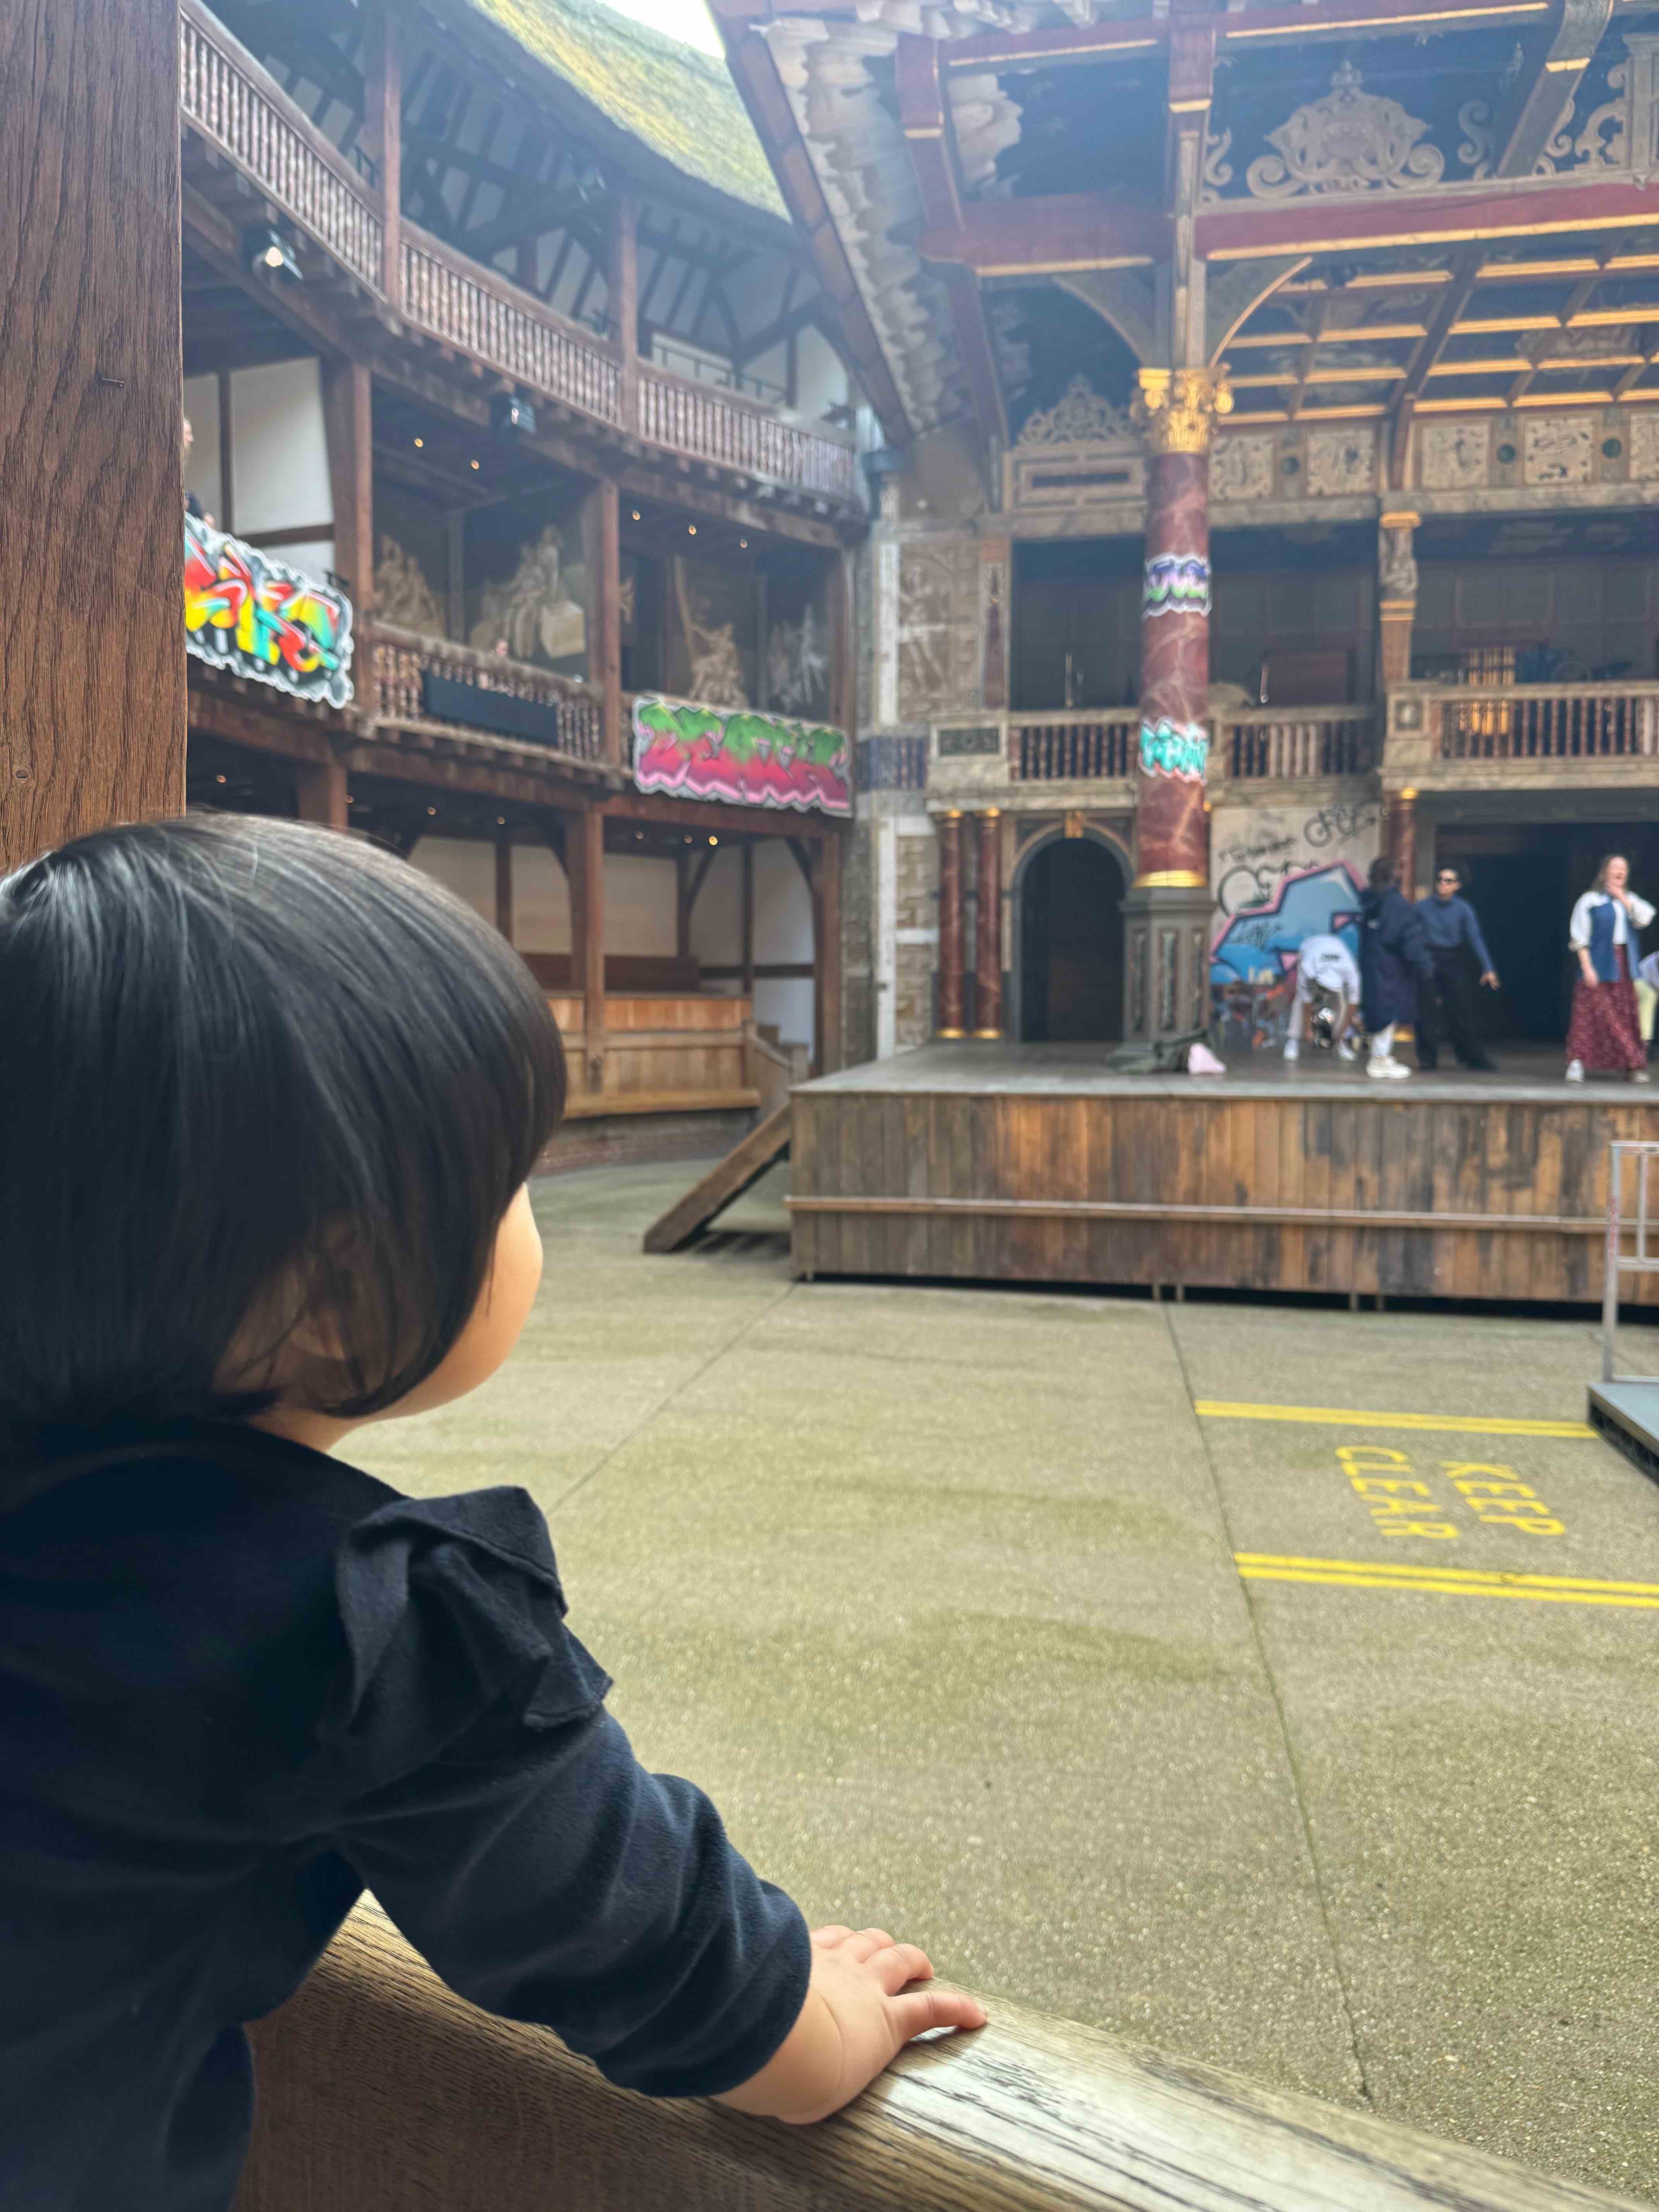 Watching rehersals at the Globe Theater